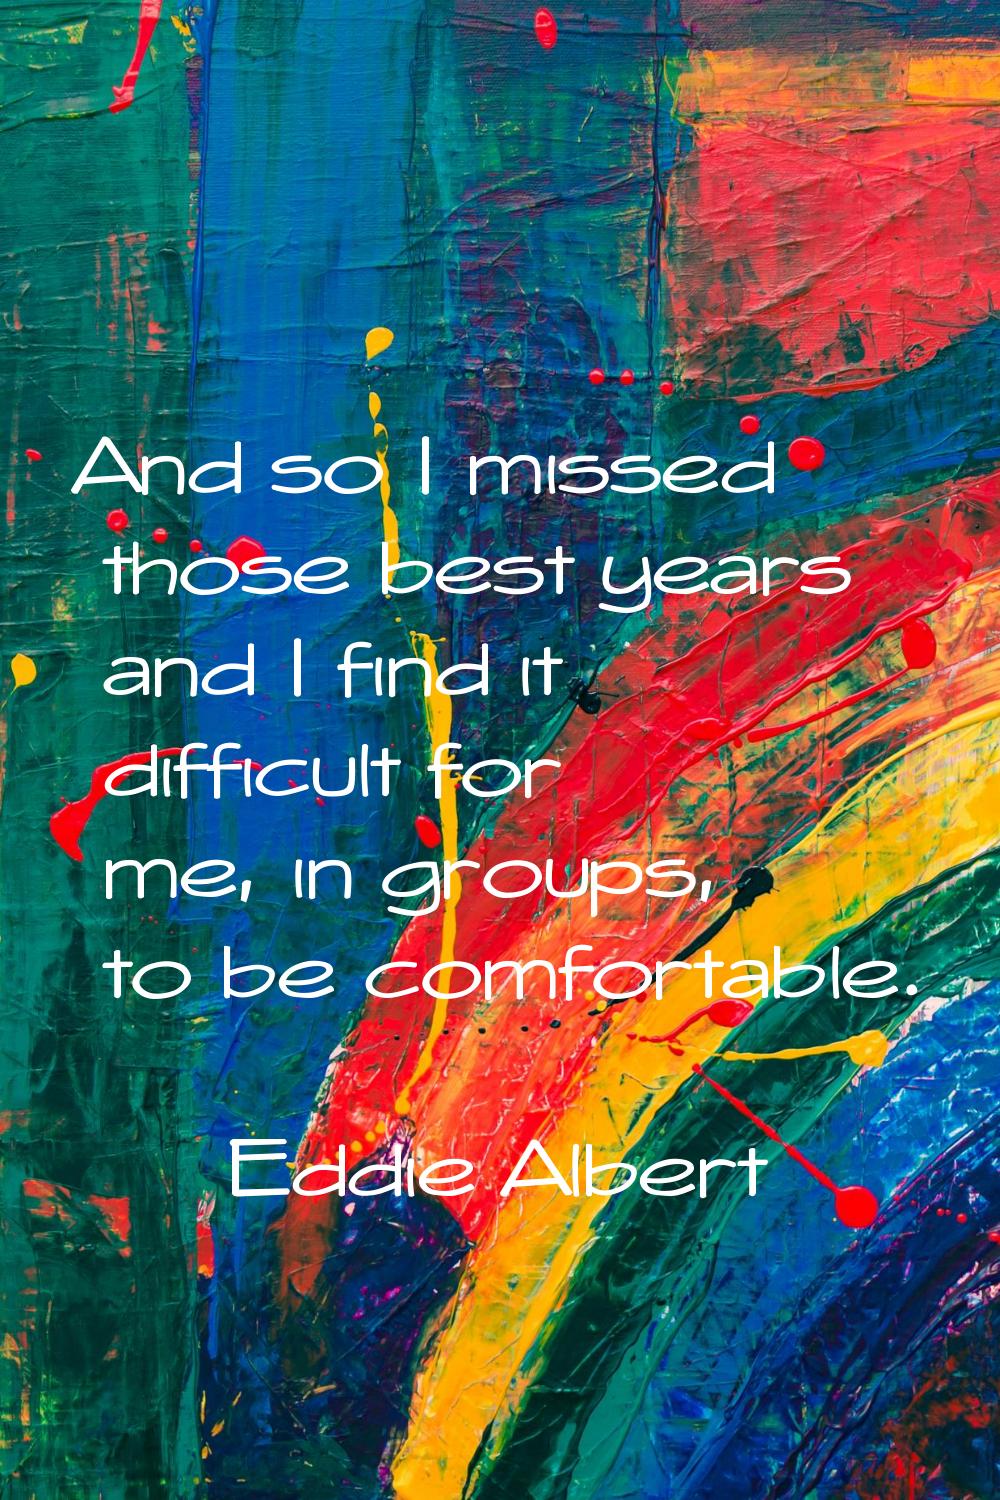 And so I missed those best years and I find it difficult for me, in groups, to be comfortable.